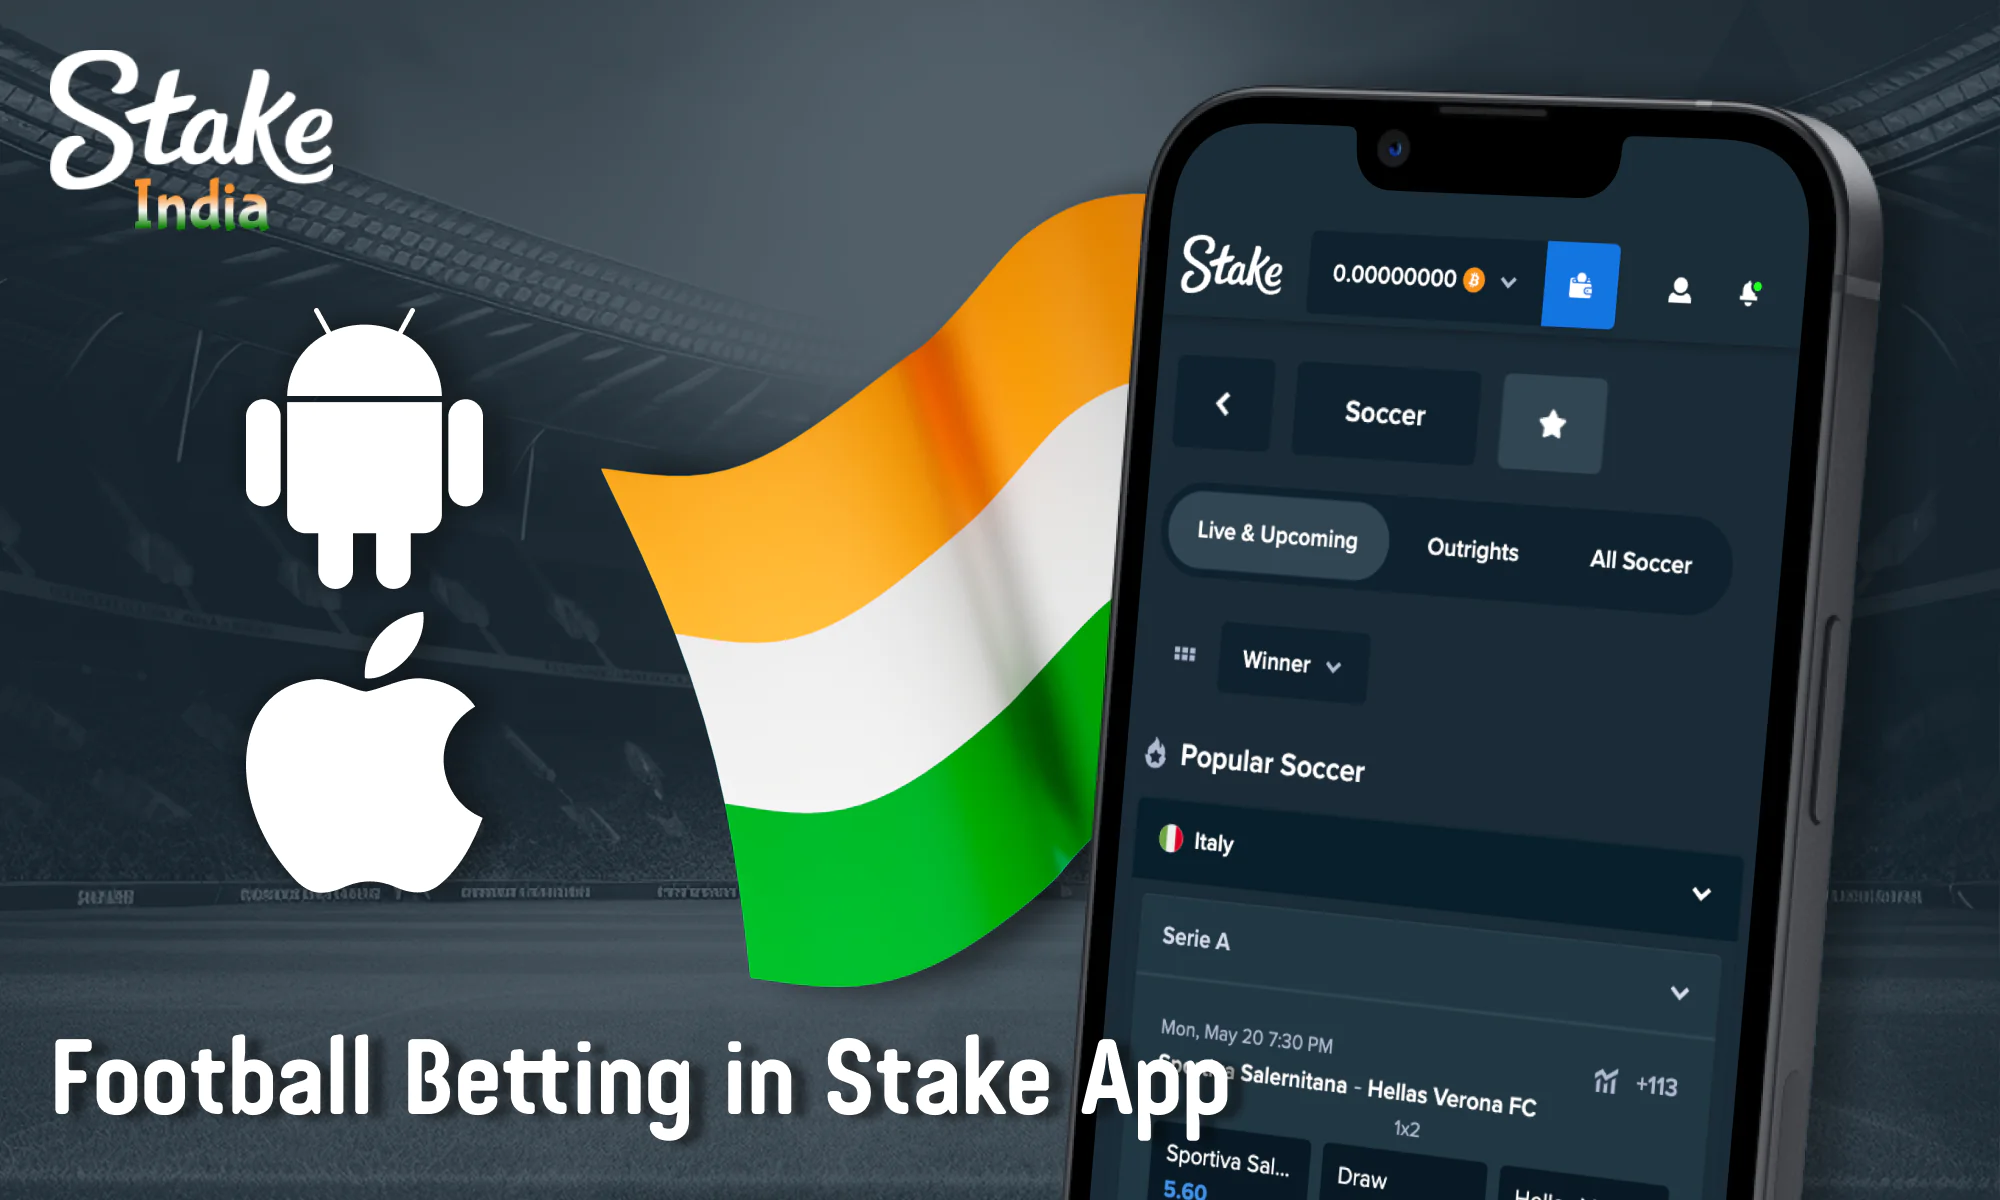 Bet on football via Stake App in India